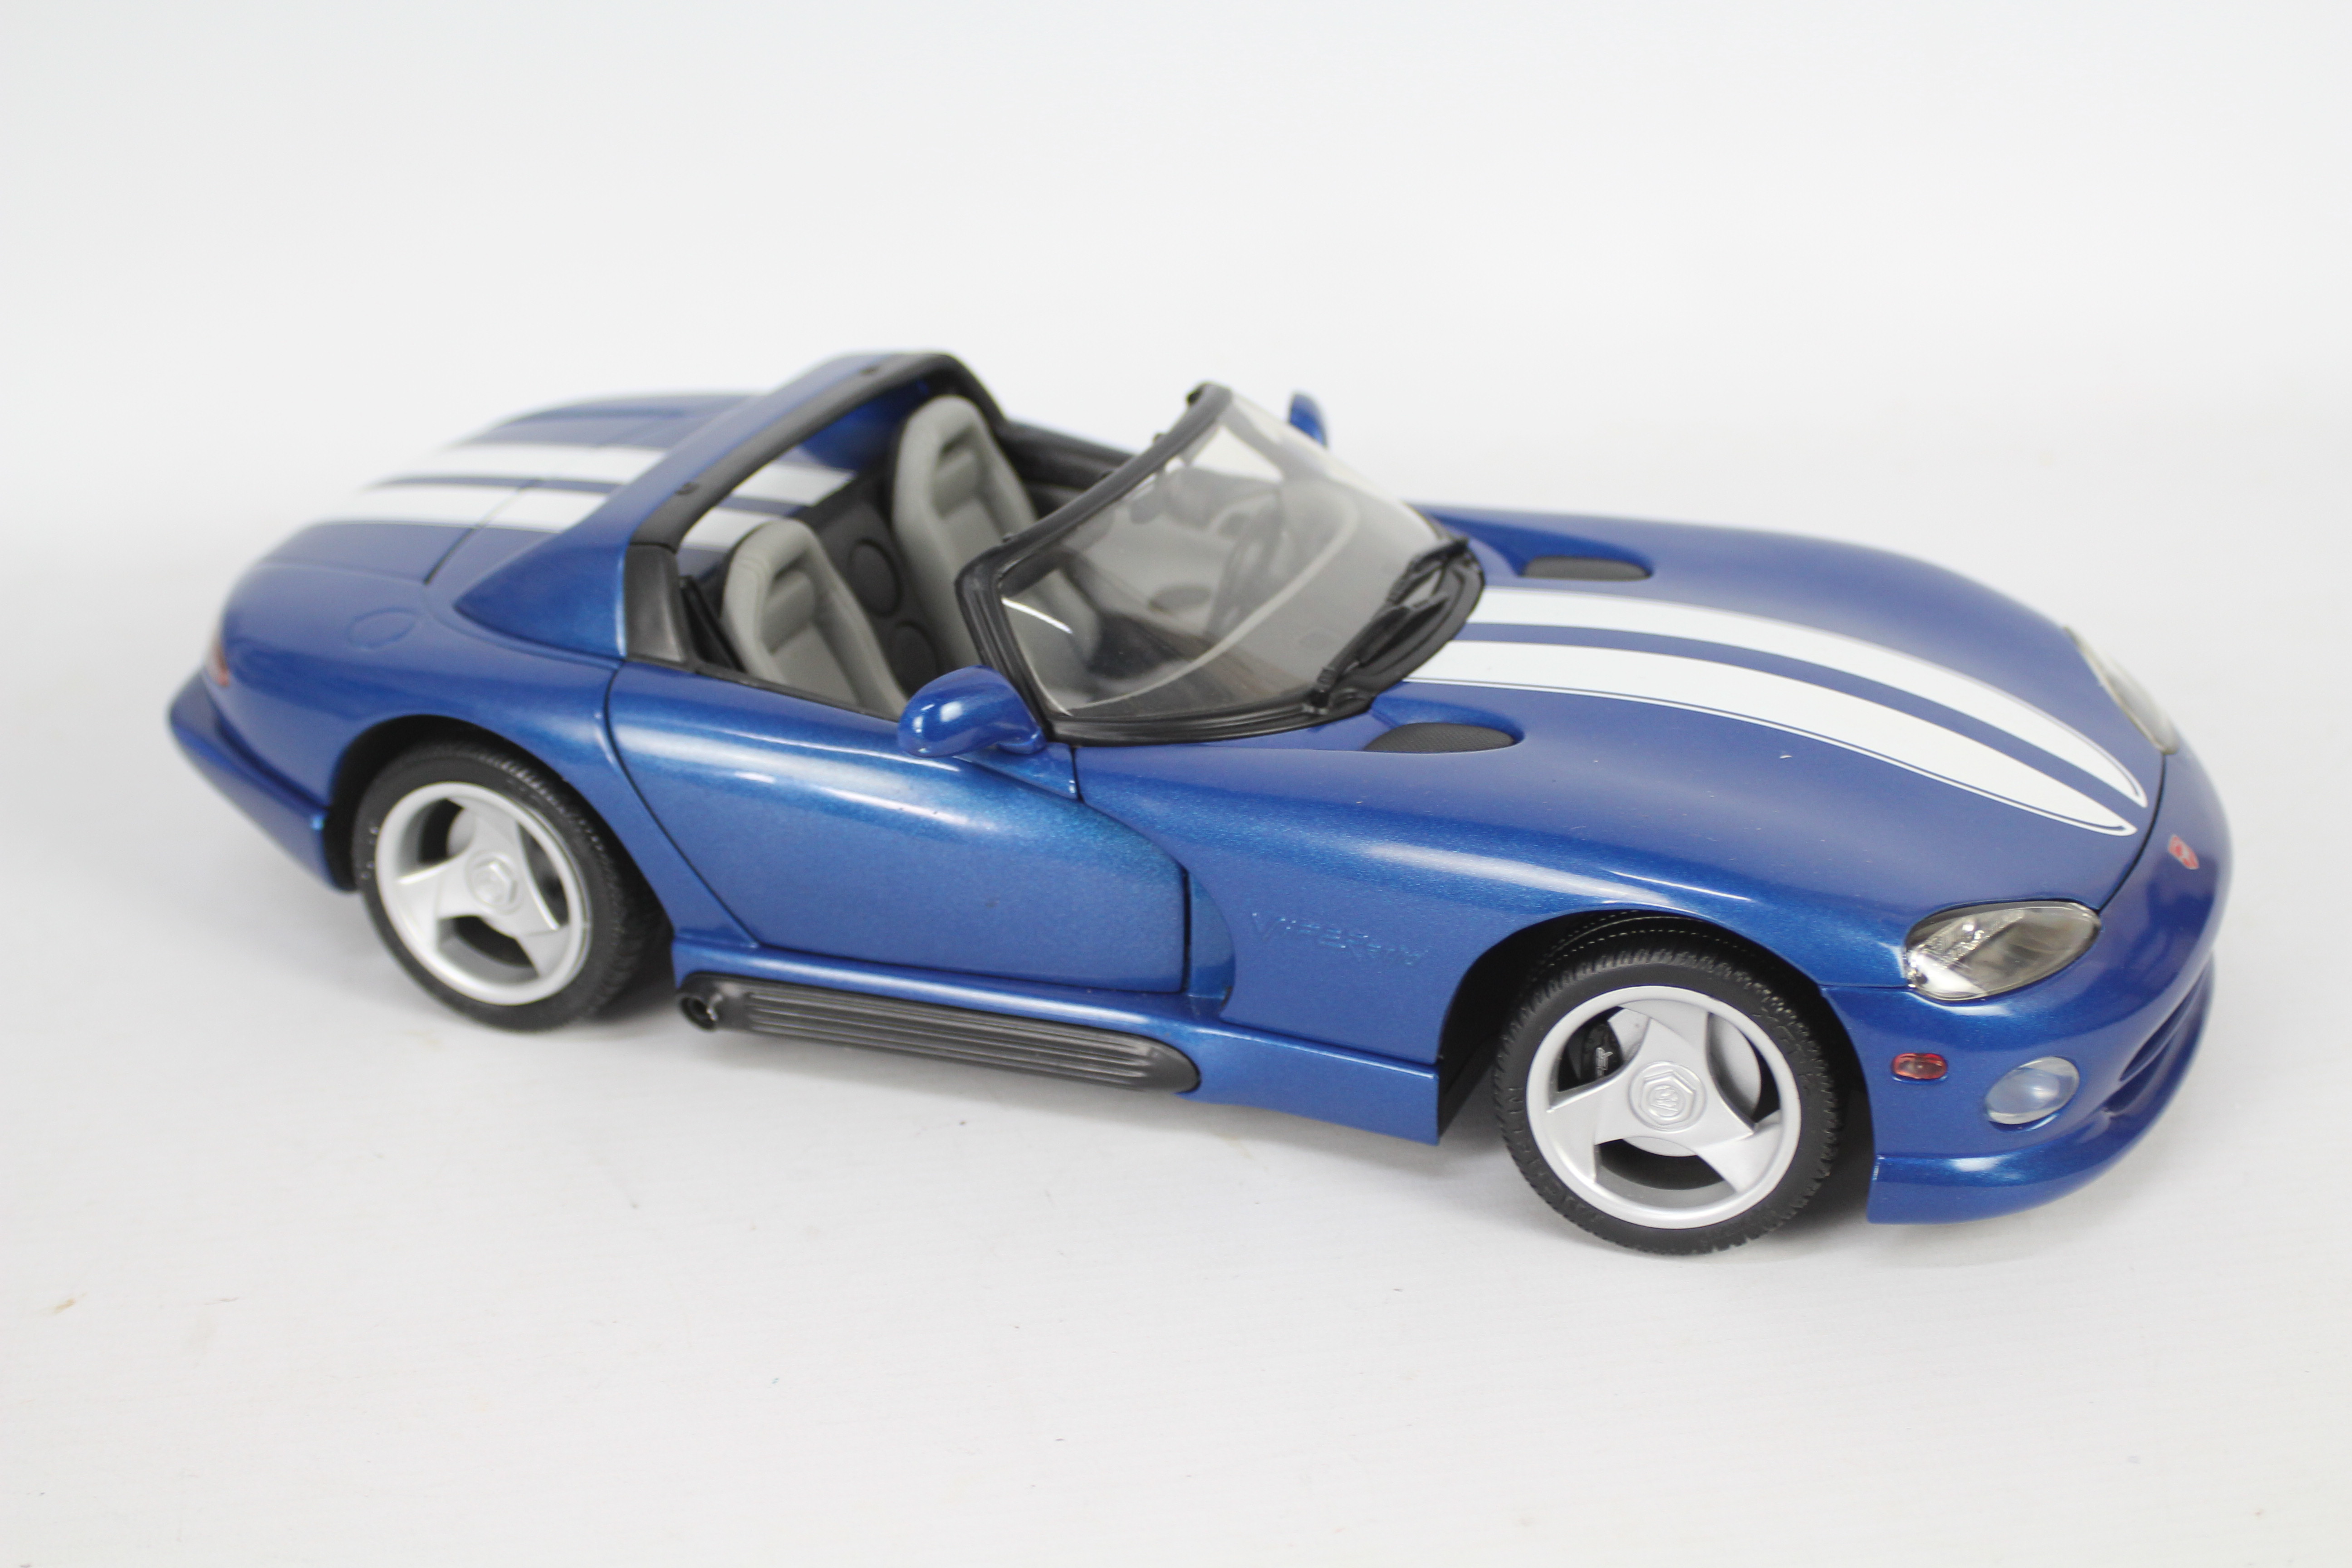 Anson - A boxed Limited Edition 1:12 scale Dodge Viper RT/10 by Anson. - Image 3 of 5